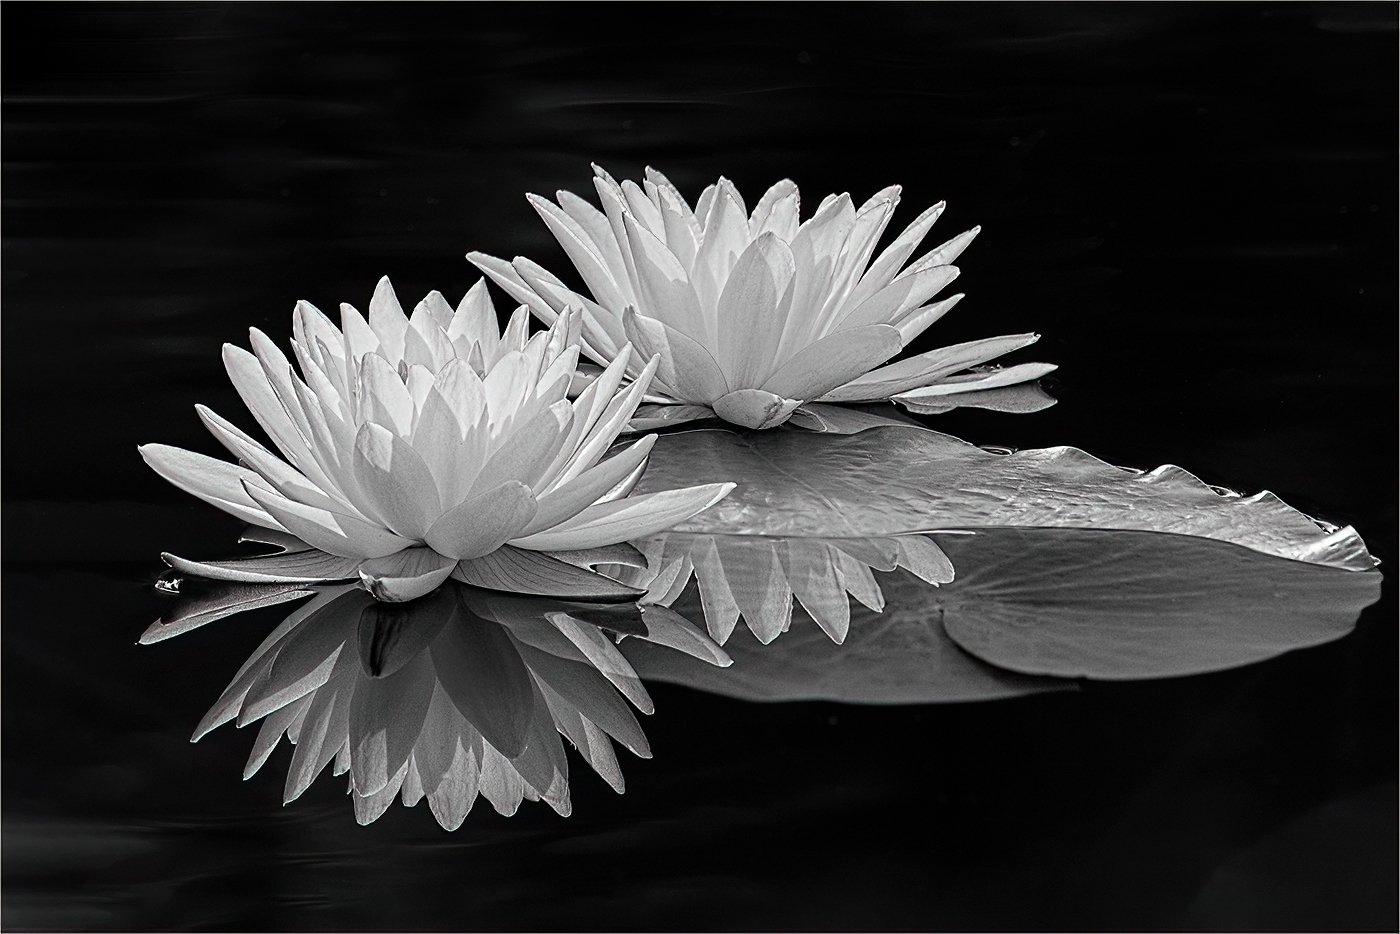 Water Lilies, Julie Cheng, Houston Photochrome Club, 2nd Place